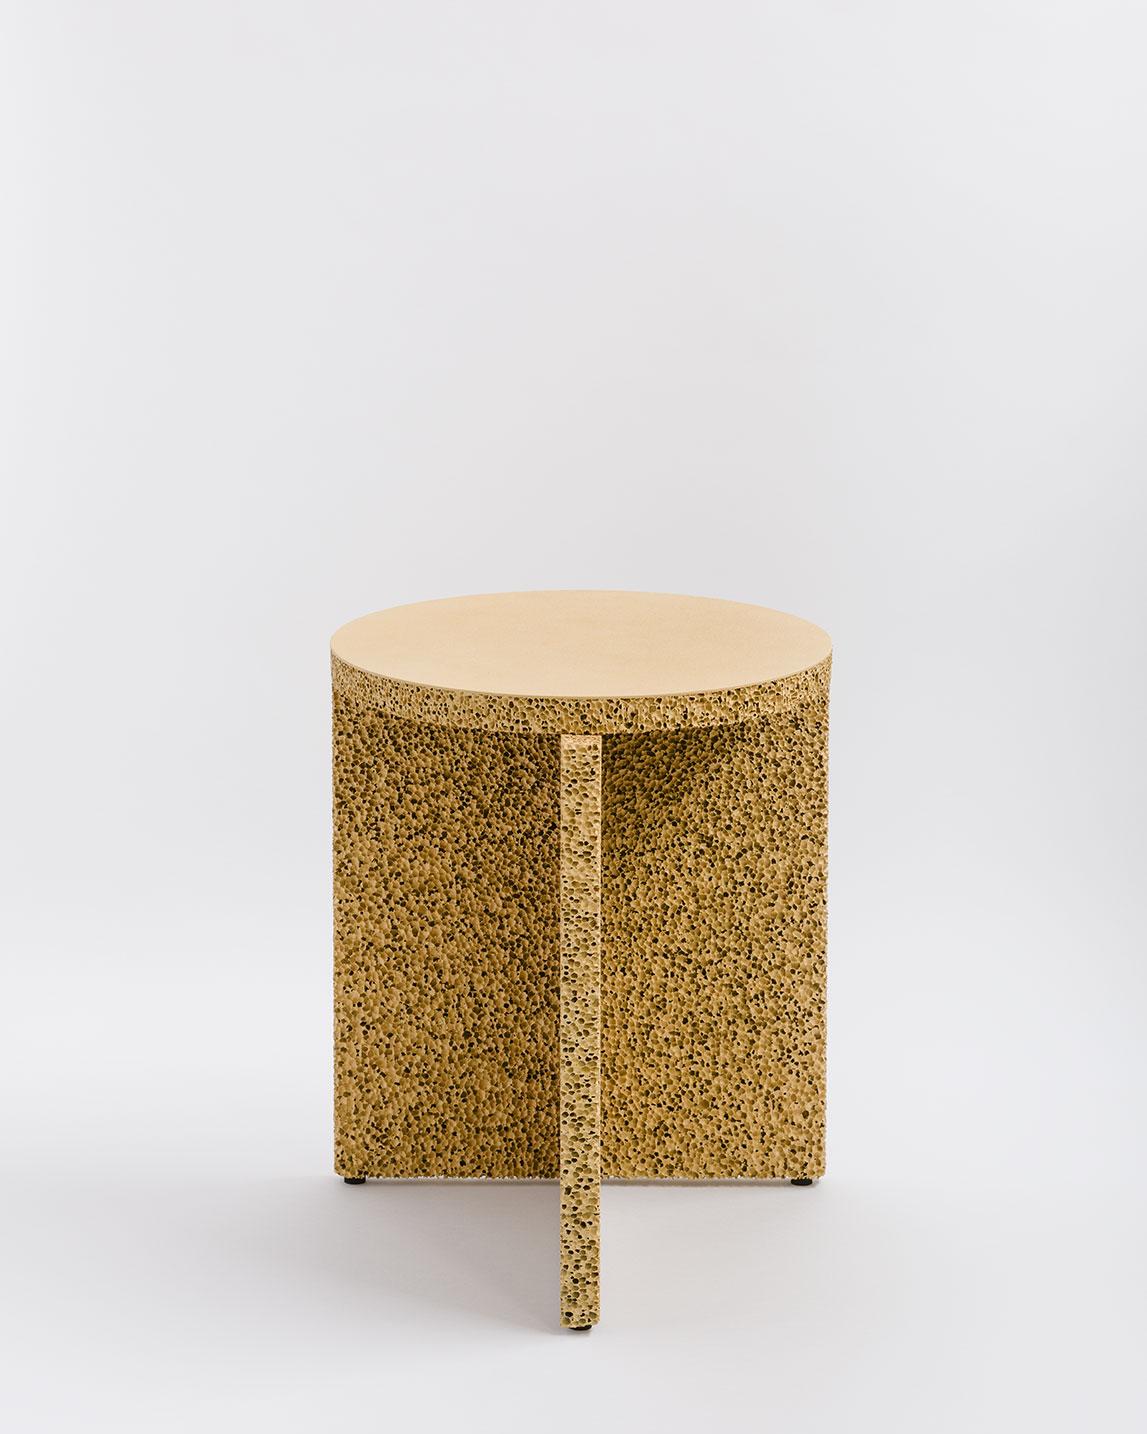 The Sponge Table is a simple construction that highlights the use of material, extenuating the surface texture. Assuming the weight and feel of an object to later find out it's nothing like what you expected is the experience intended by the Sponge